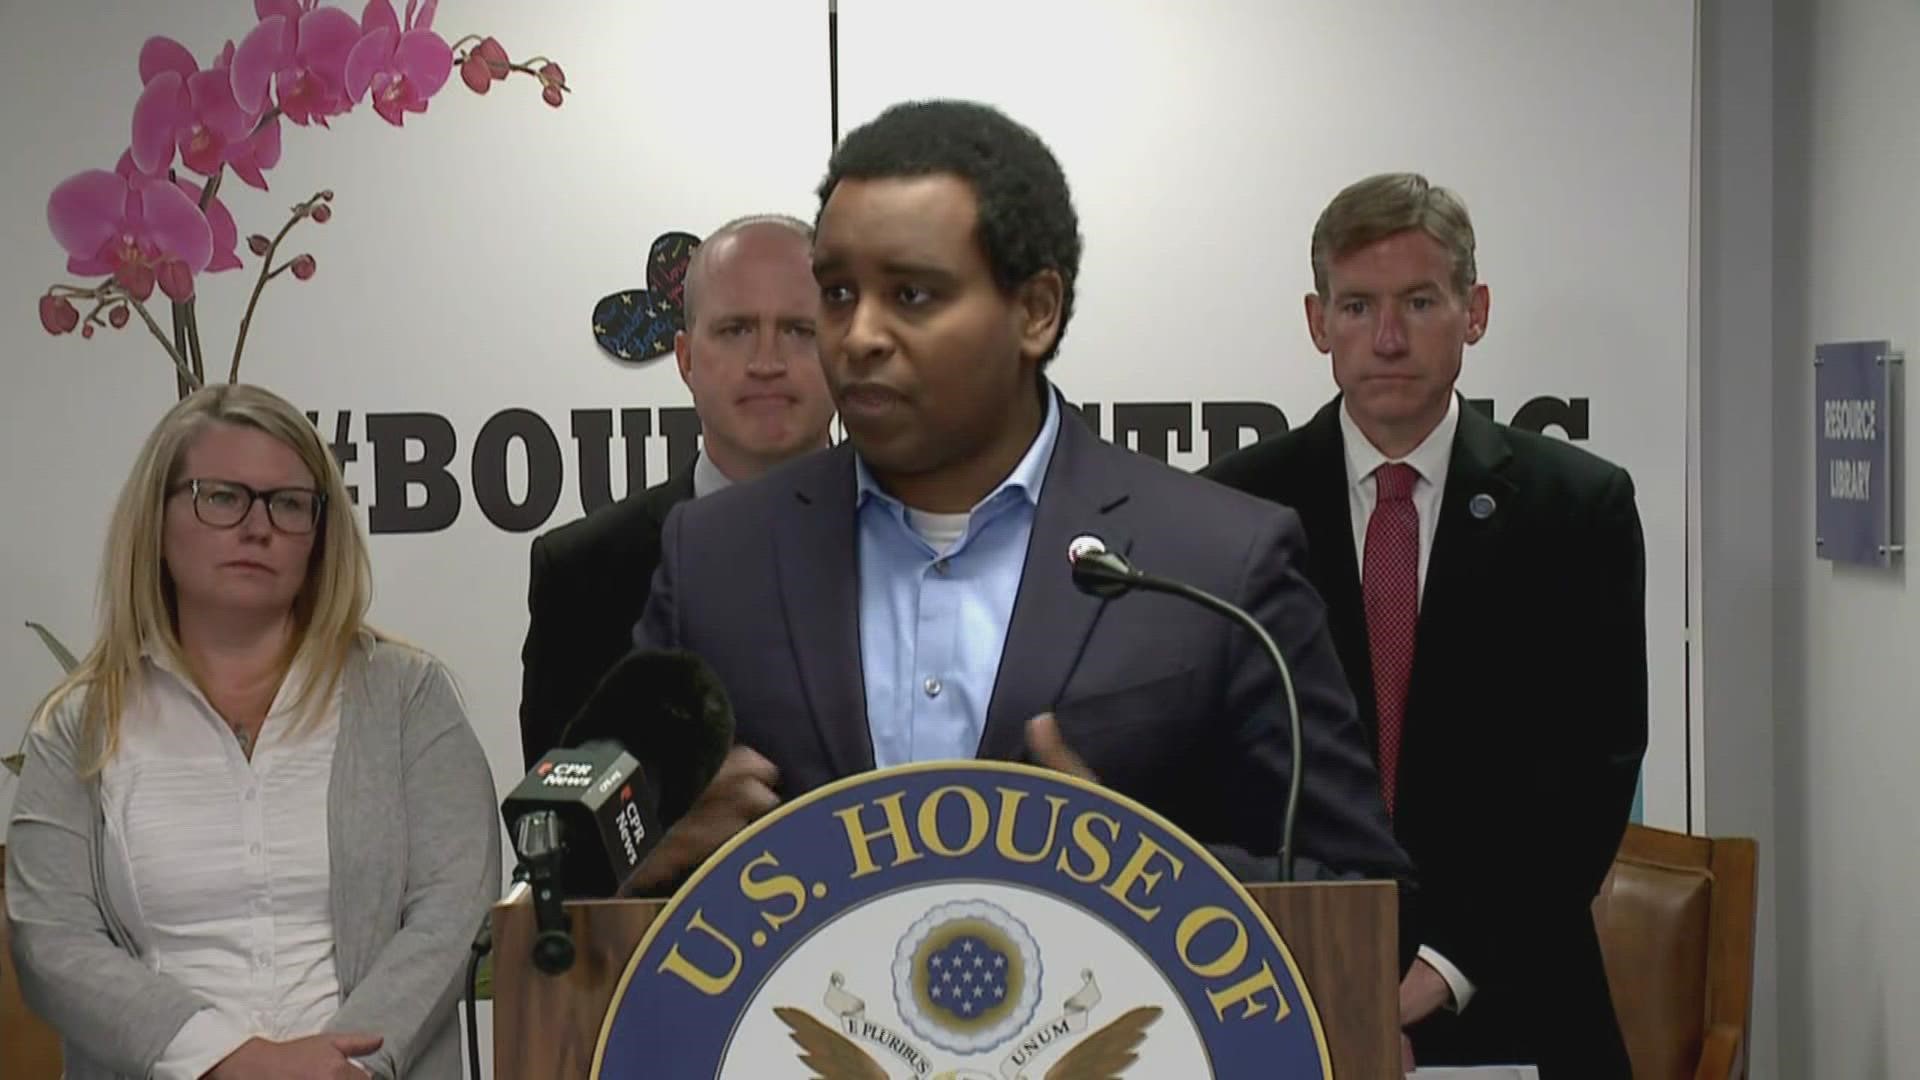 Congressman Joe Neguse unveiled new legislation Tuesday aimed at supporting communities impacted by gun violence following the King Soopers mass shooting.